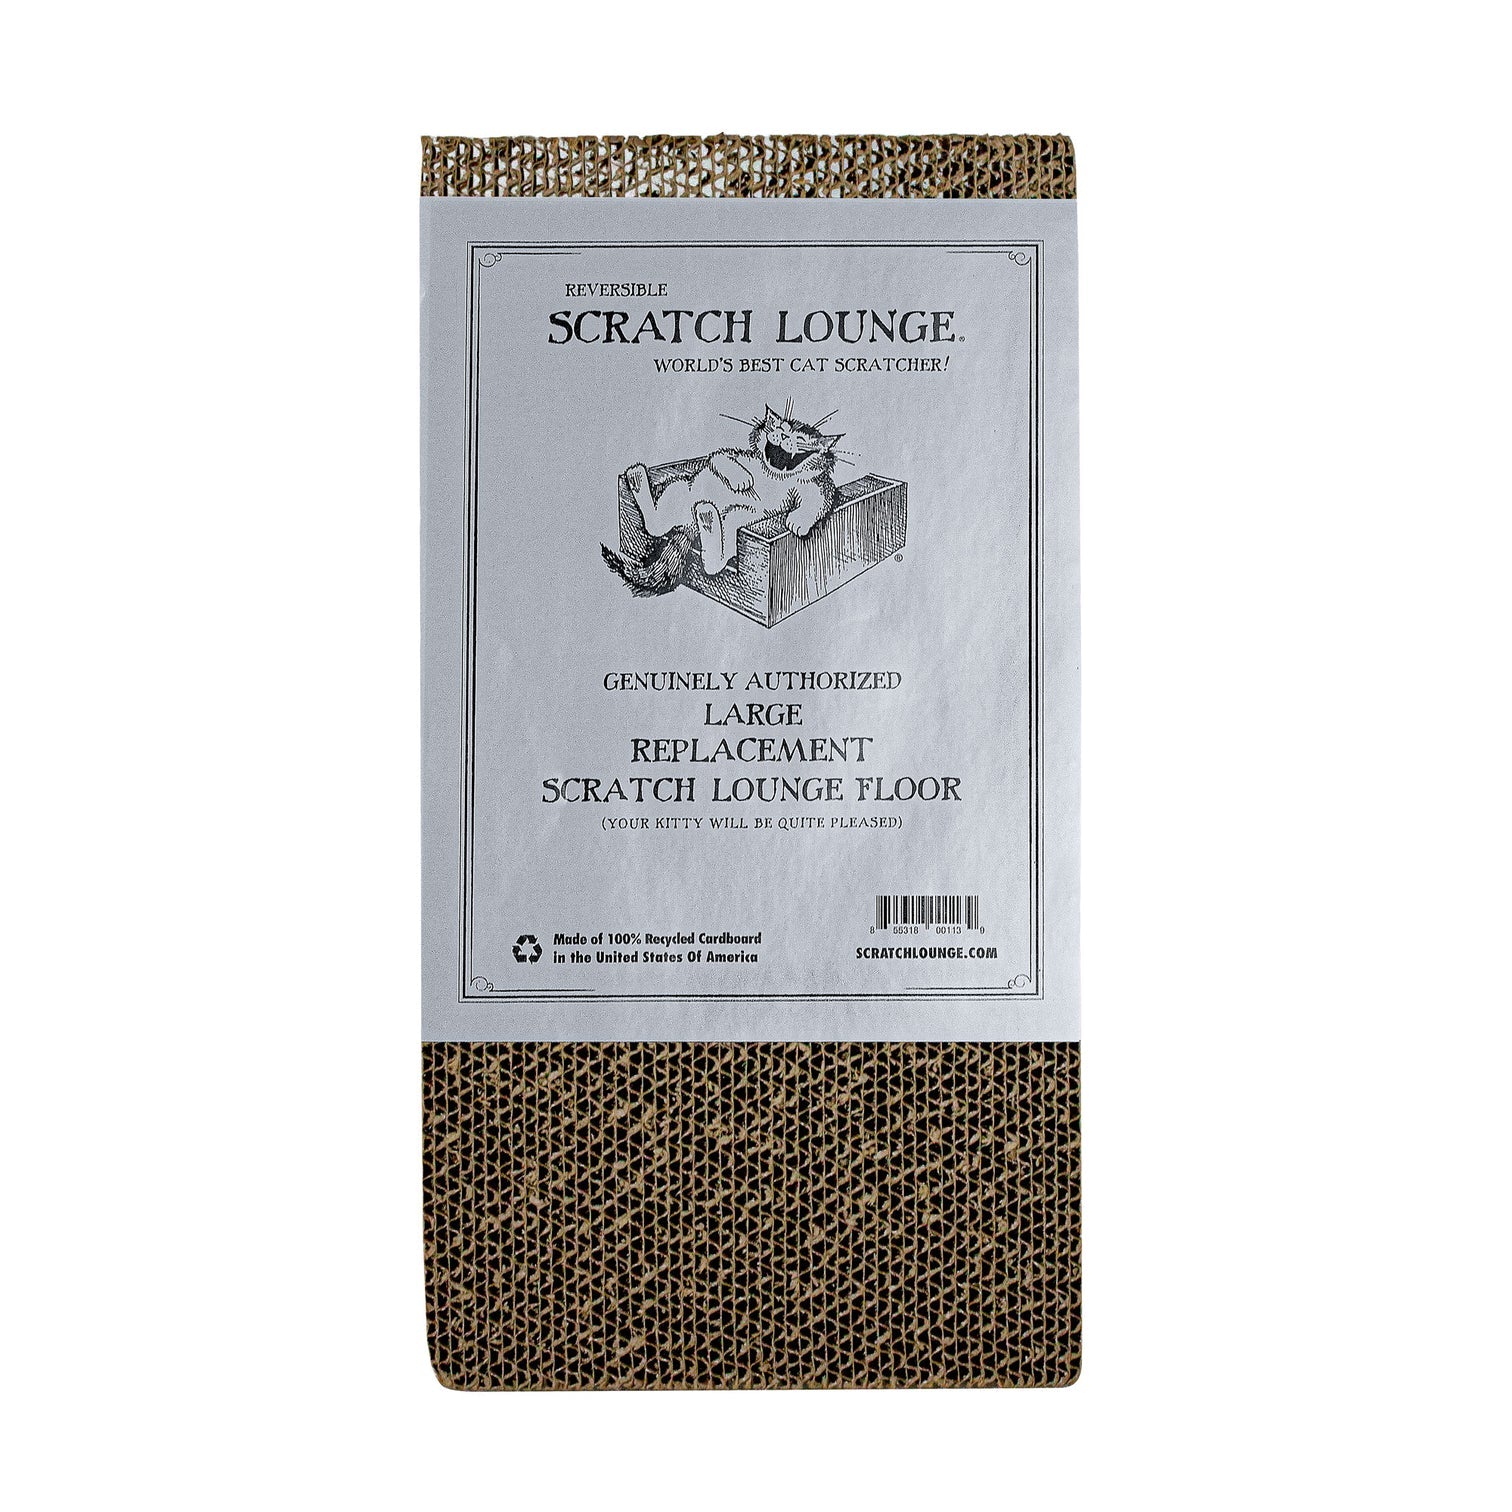 Replacement Floor Refill for The Original Scratch Lounge